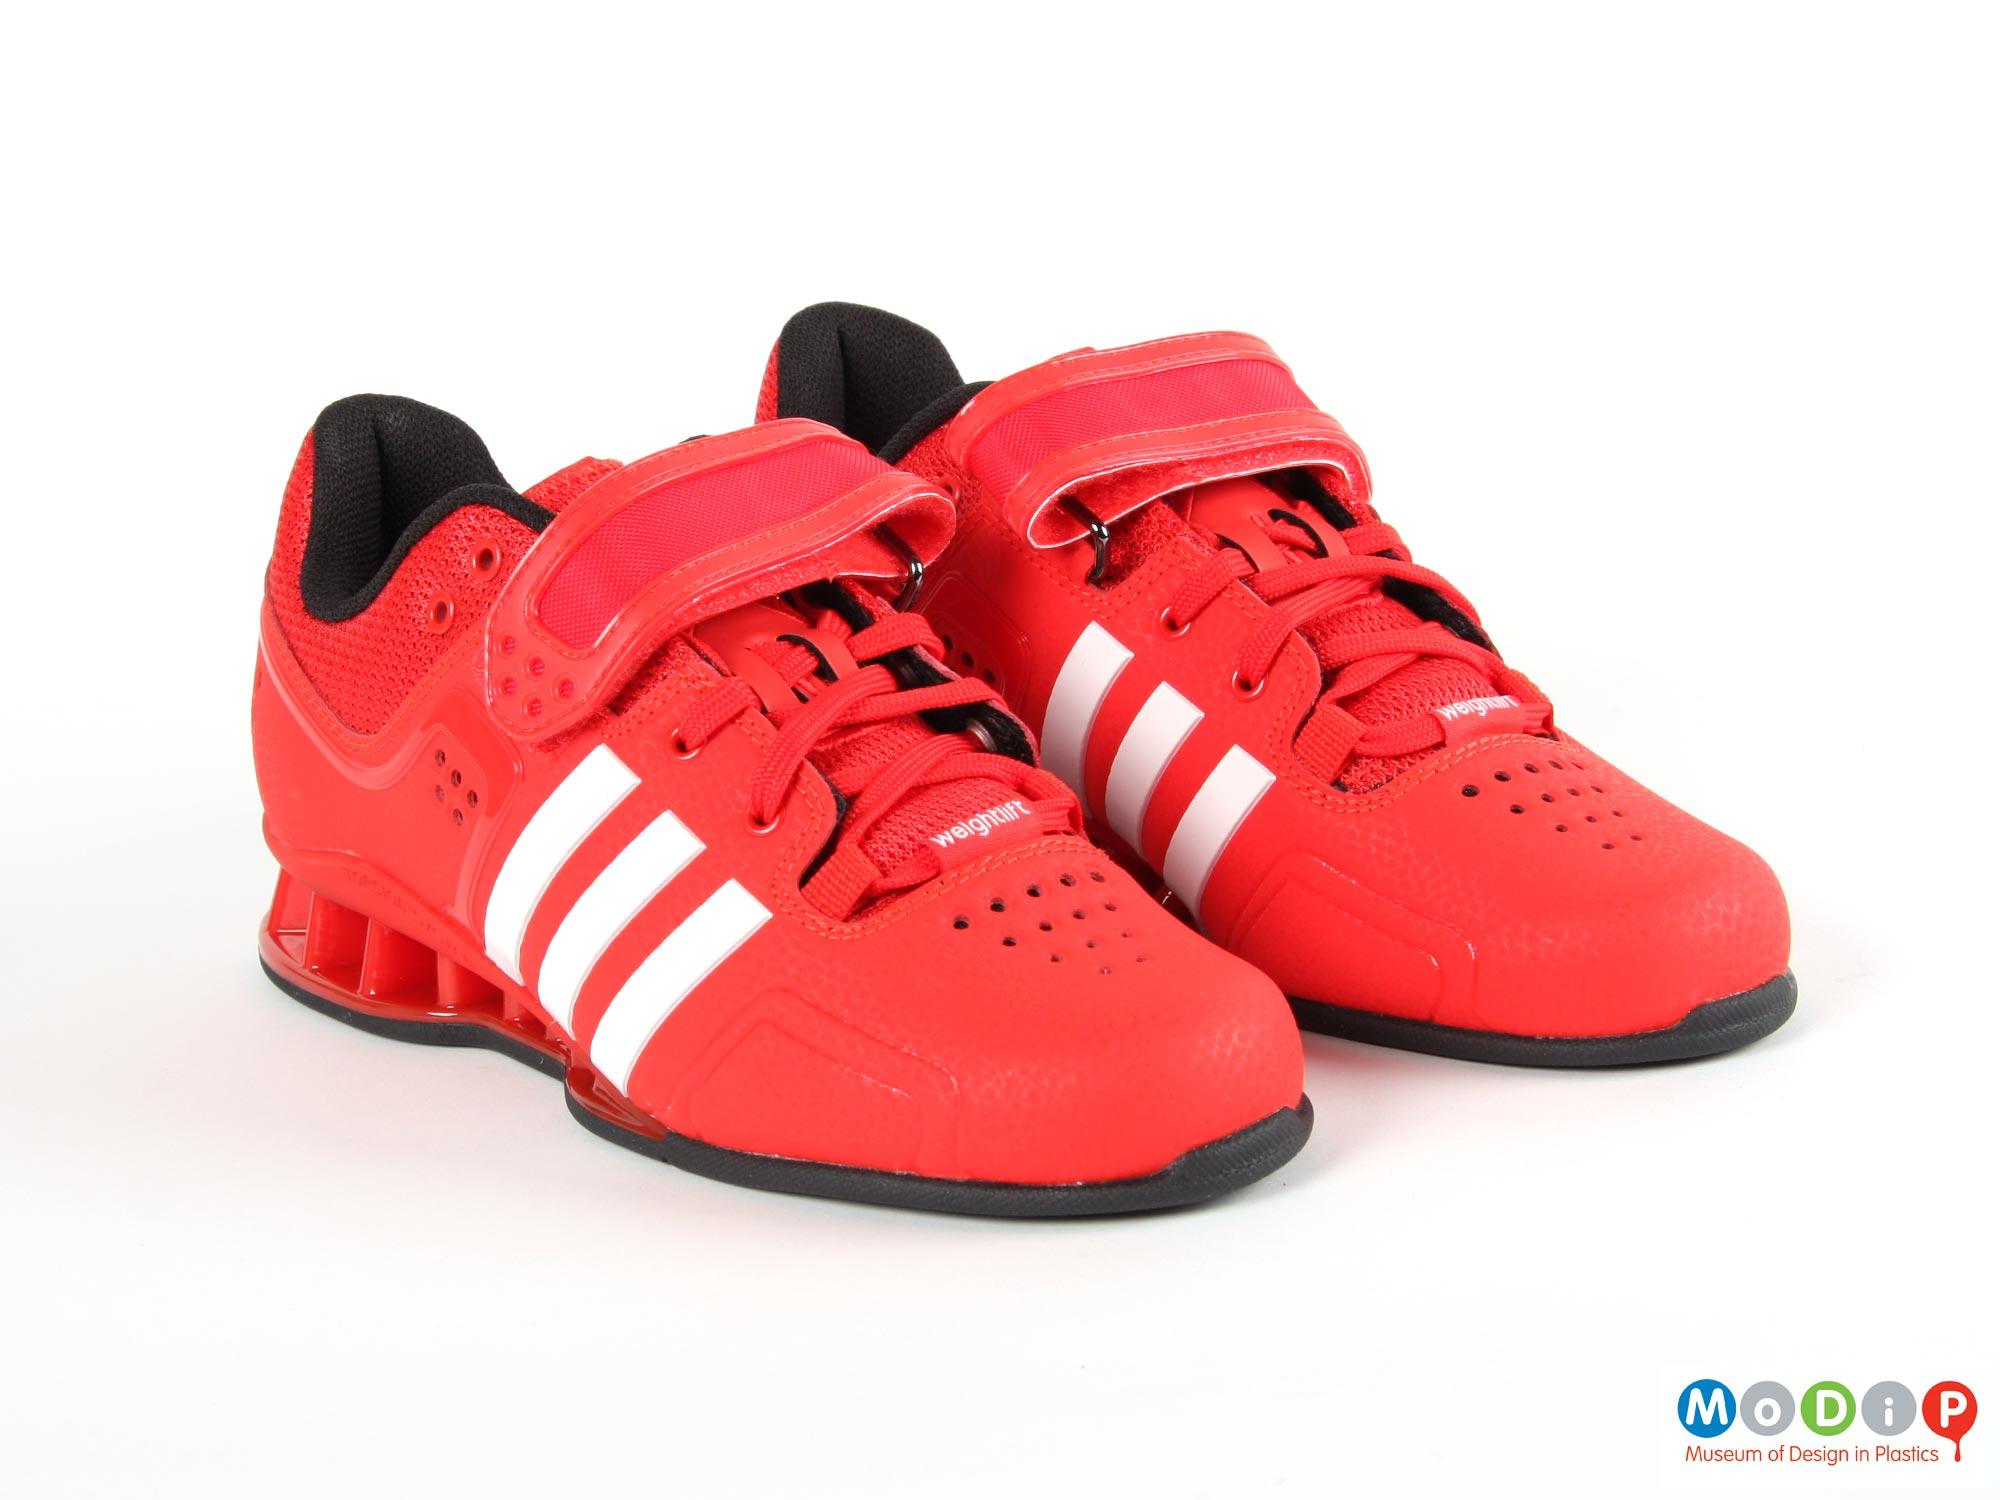 Adipower weightlifting shoes | Museum of Design in Plastics